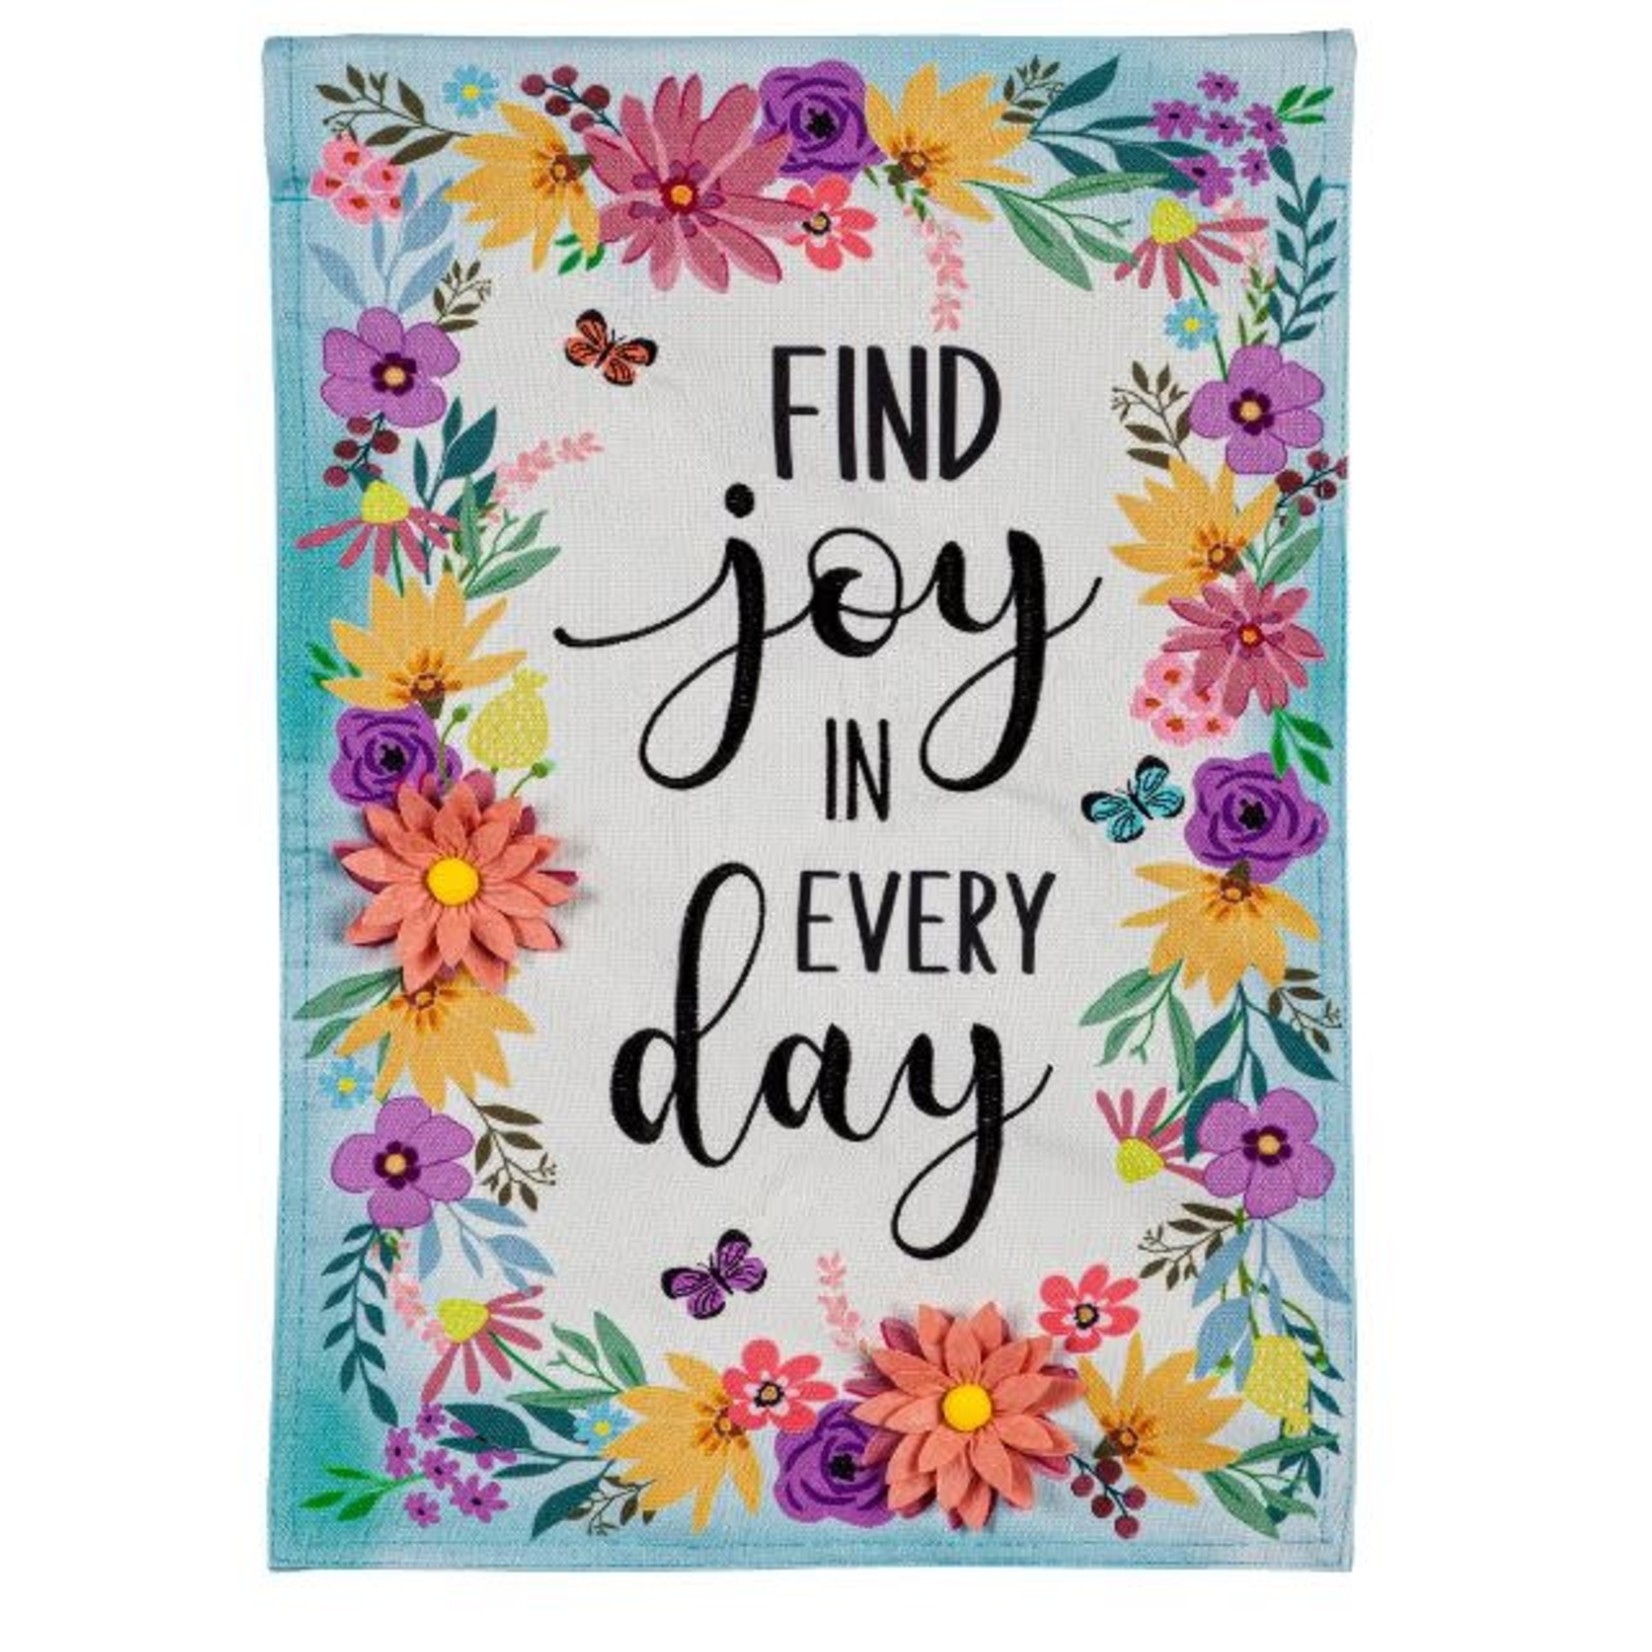 FIND JOY IN EVERY DAY